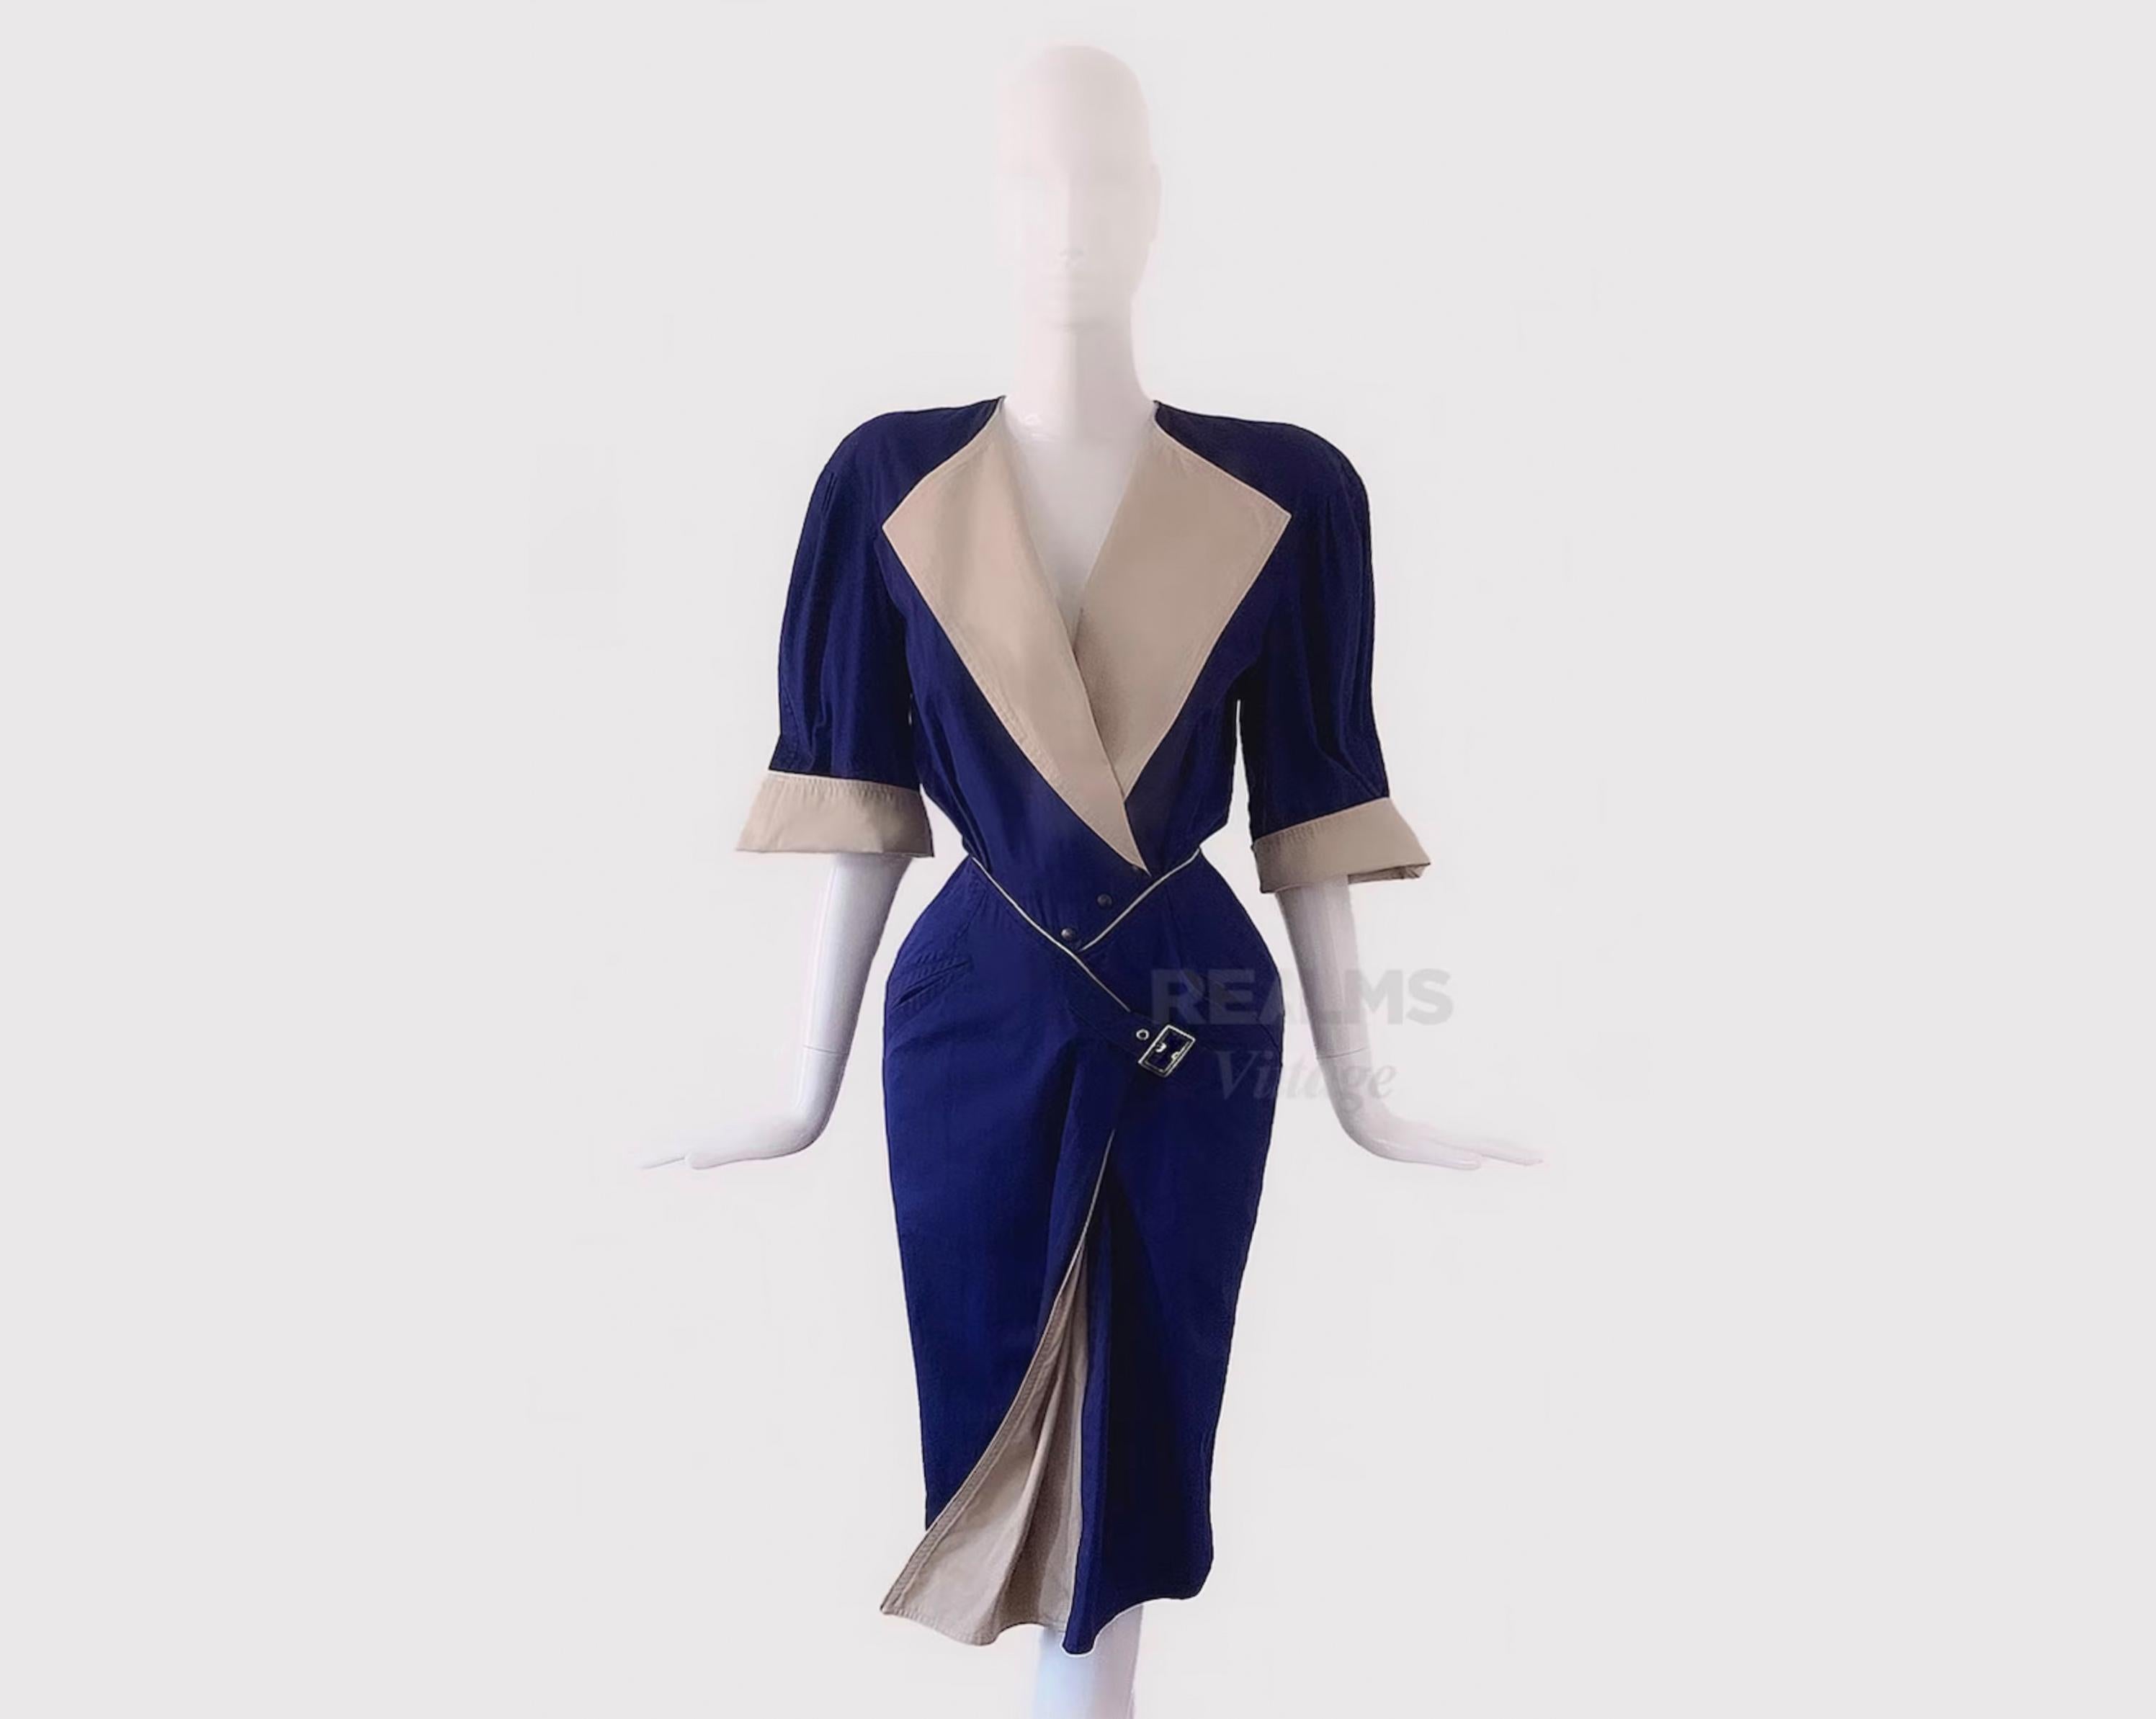 Holy Grail Thierry Mugler Dress Iman SS 1986 Runway Documented For Sale 1